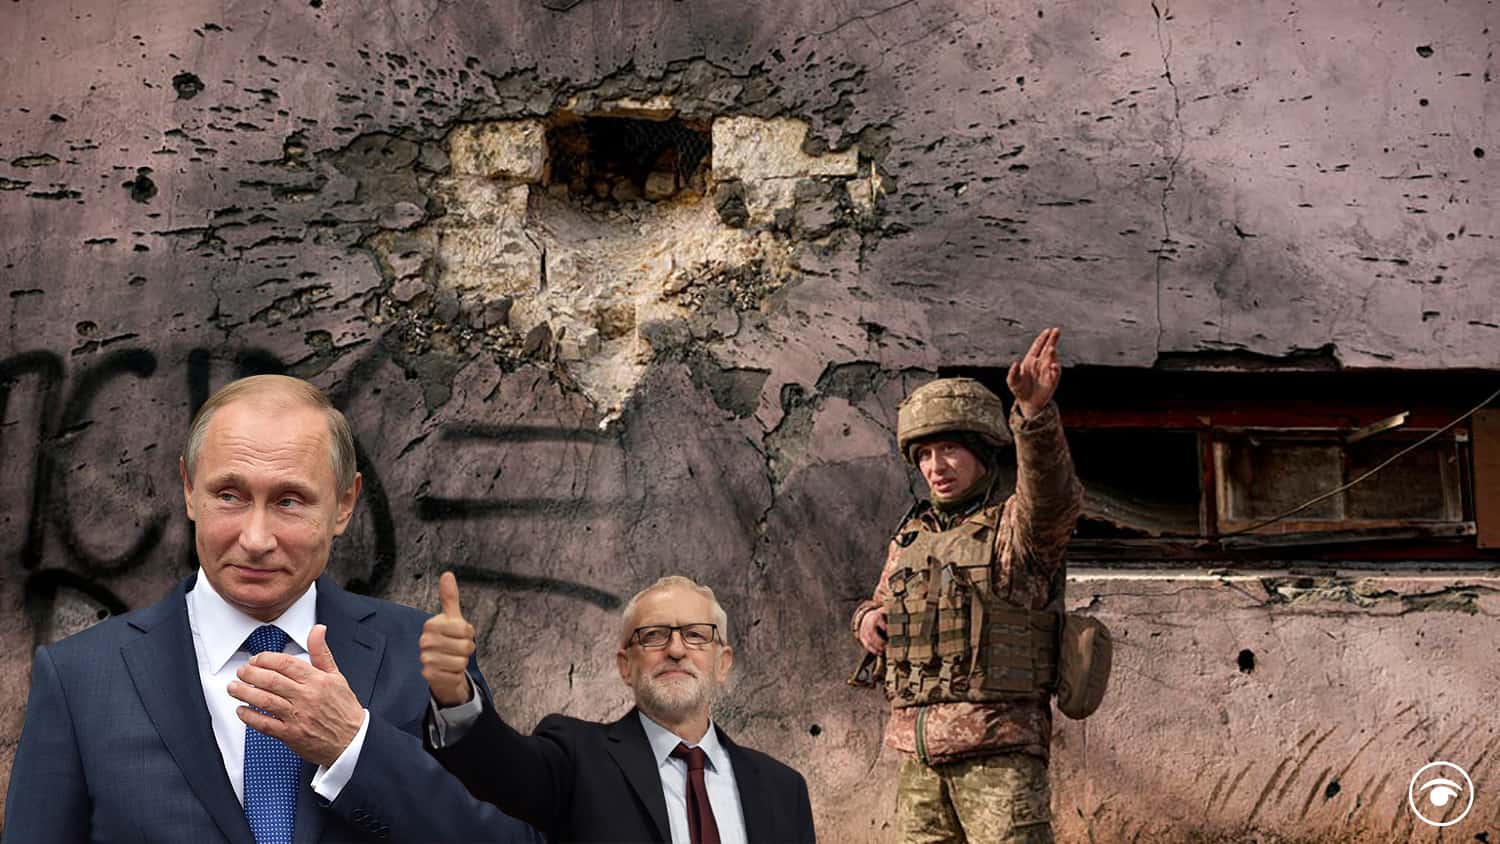 As Russia invades, hacks ask the big question: what if Corbyn was PM?